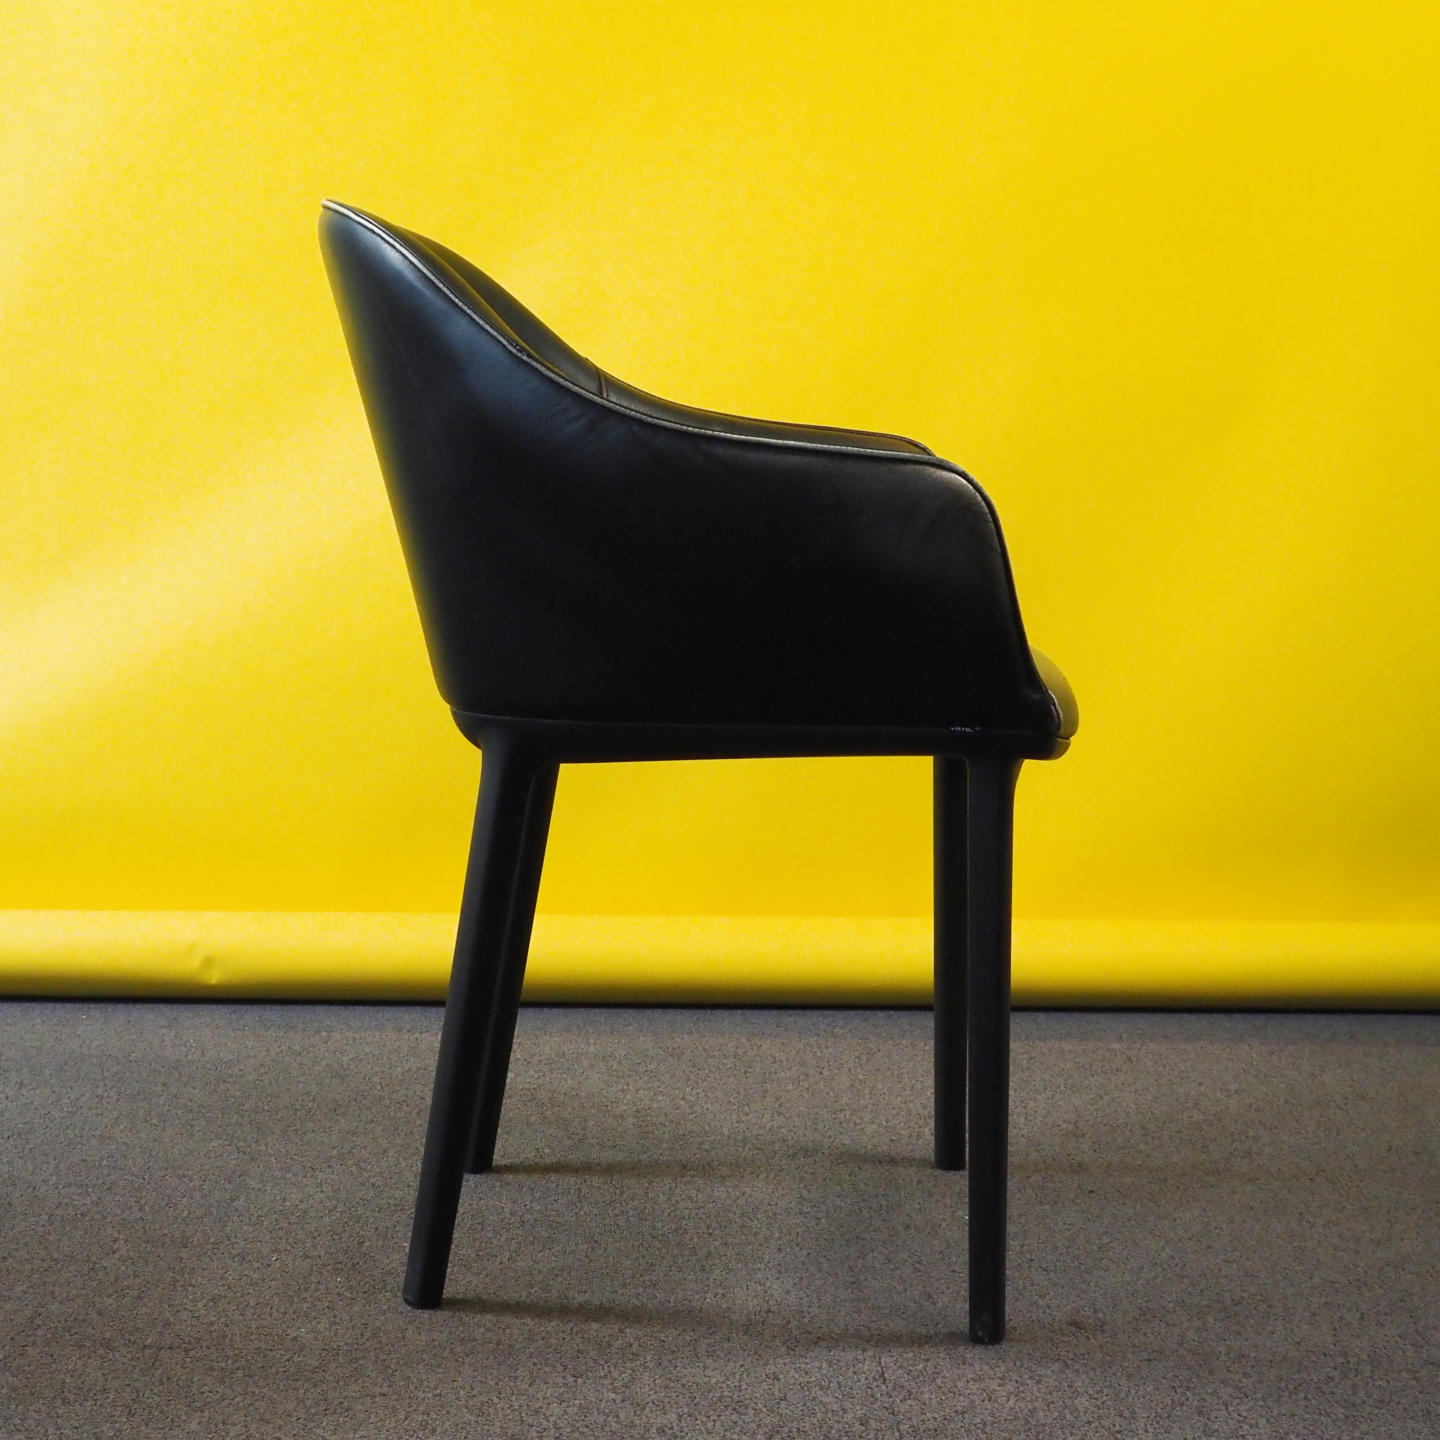 Armchair 'Softshell' in leather by Ronan &amp; Erwan Bouroullec for Vitra (ca. 2008) - Black